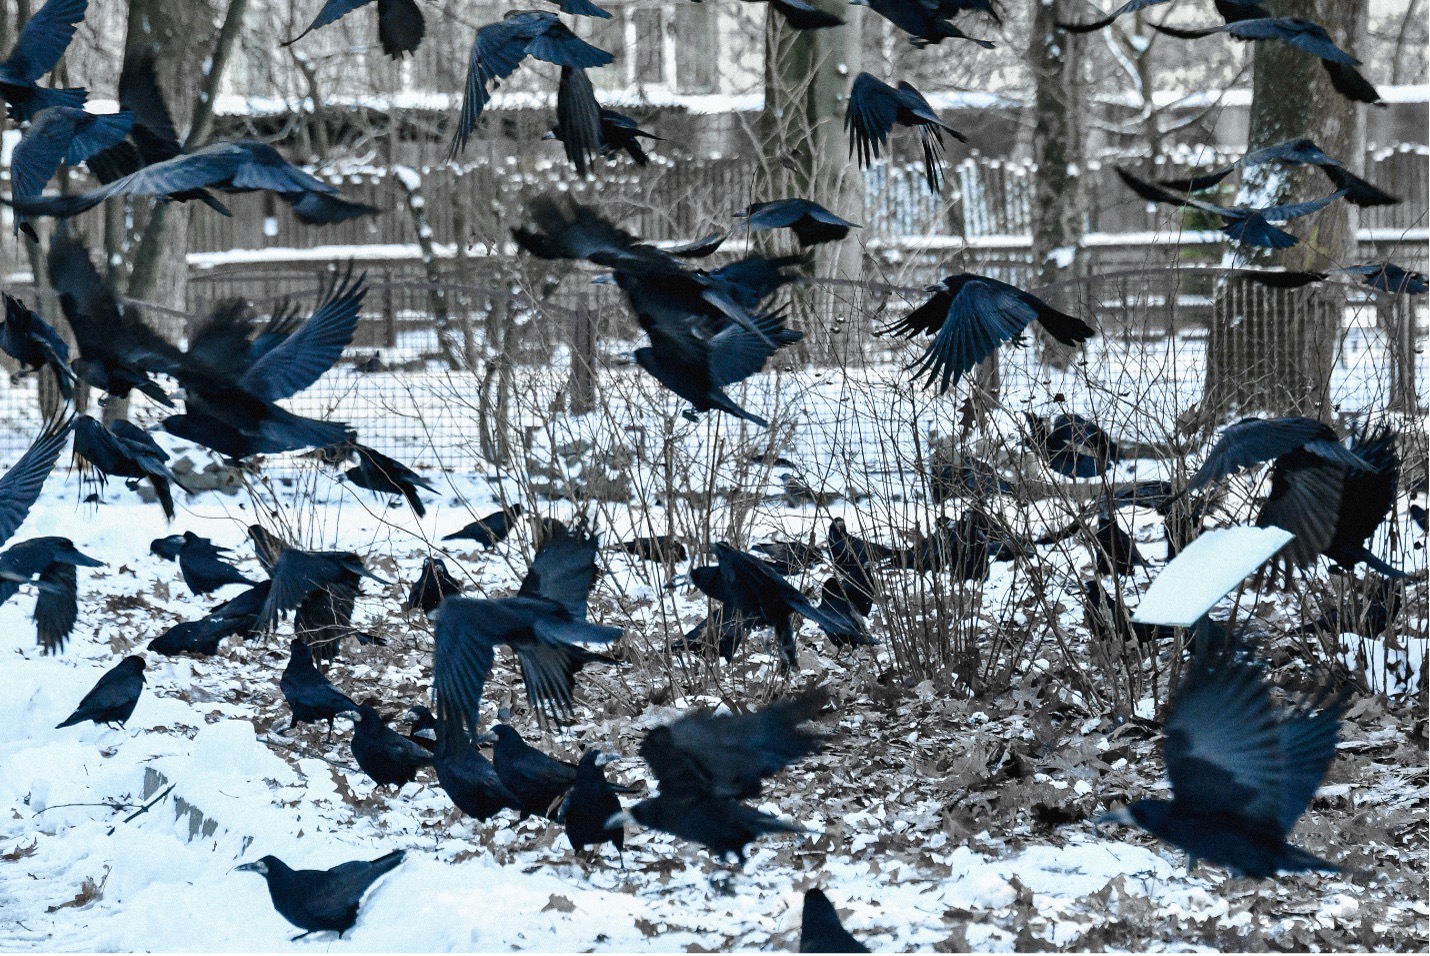 Conspiracy of ravens takes to the air at the Kyiv City Zoo. These are wild ravens and not a zoo exhibit. Dec. 10 photo by Stefan Korshak.